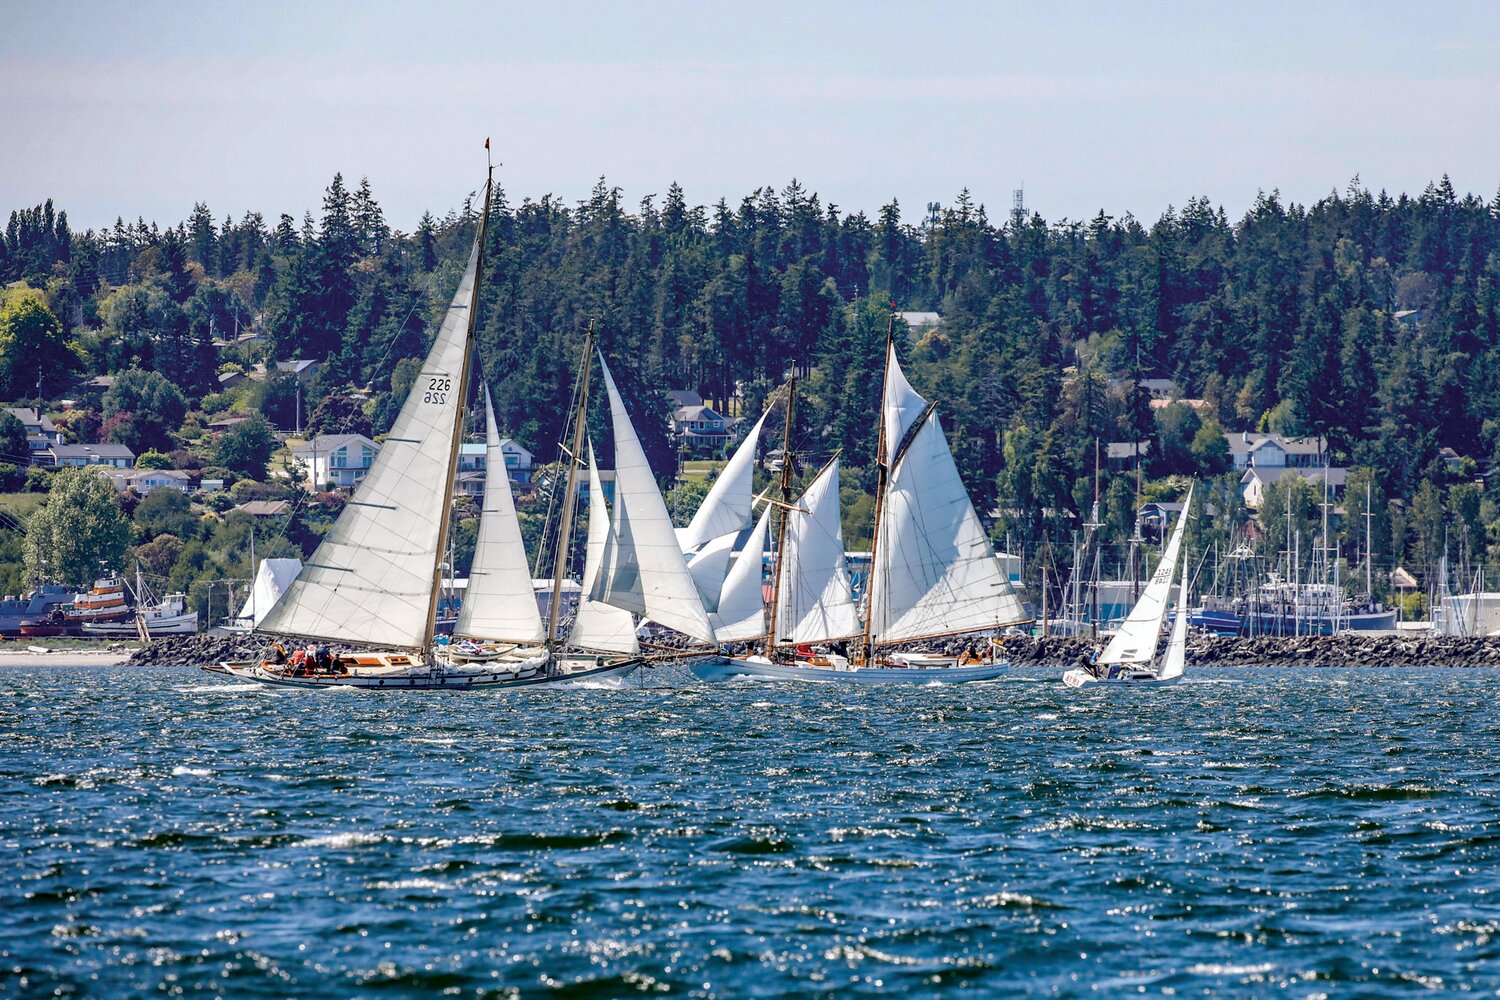 The water in Port Townsend Bay gets a bit choppy during the 40th annual Classic Mariners Regatta.